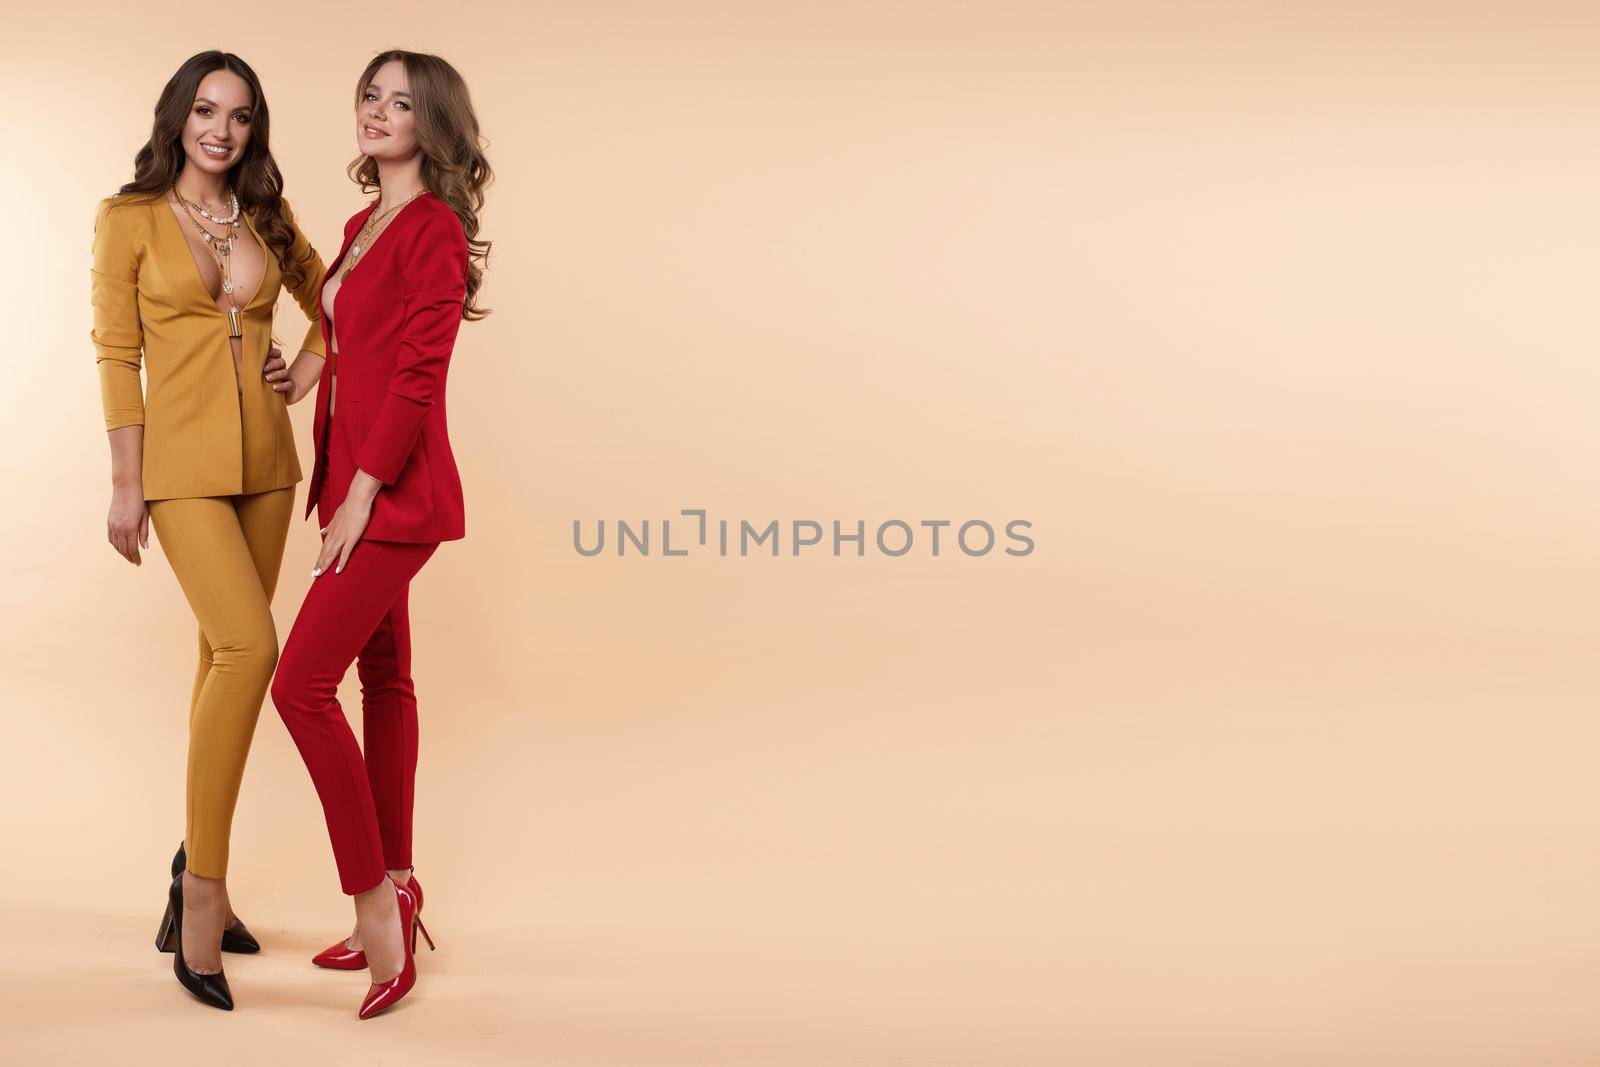 Full length studio portrait of stylish elegant brunette women in red and yellow office suits and high heels. They holding folded arms and looking at camera, posing on flat one-colored background. Studio shot.